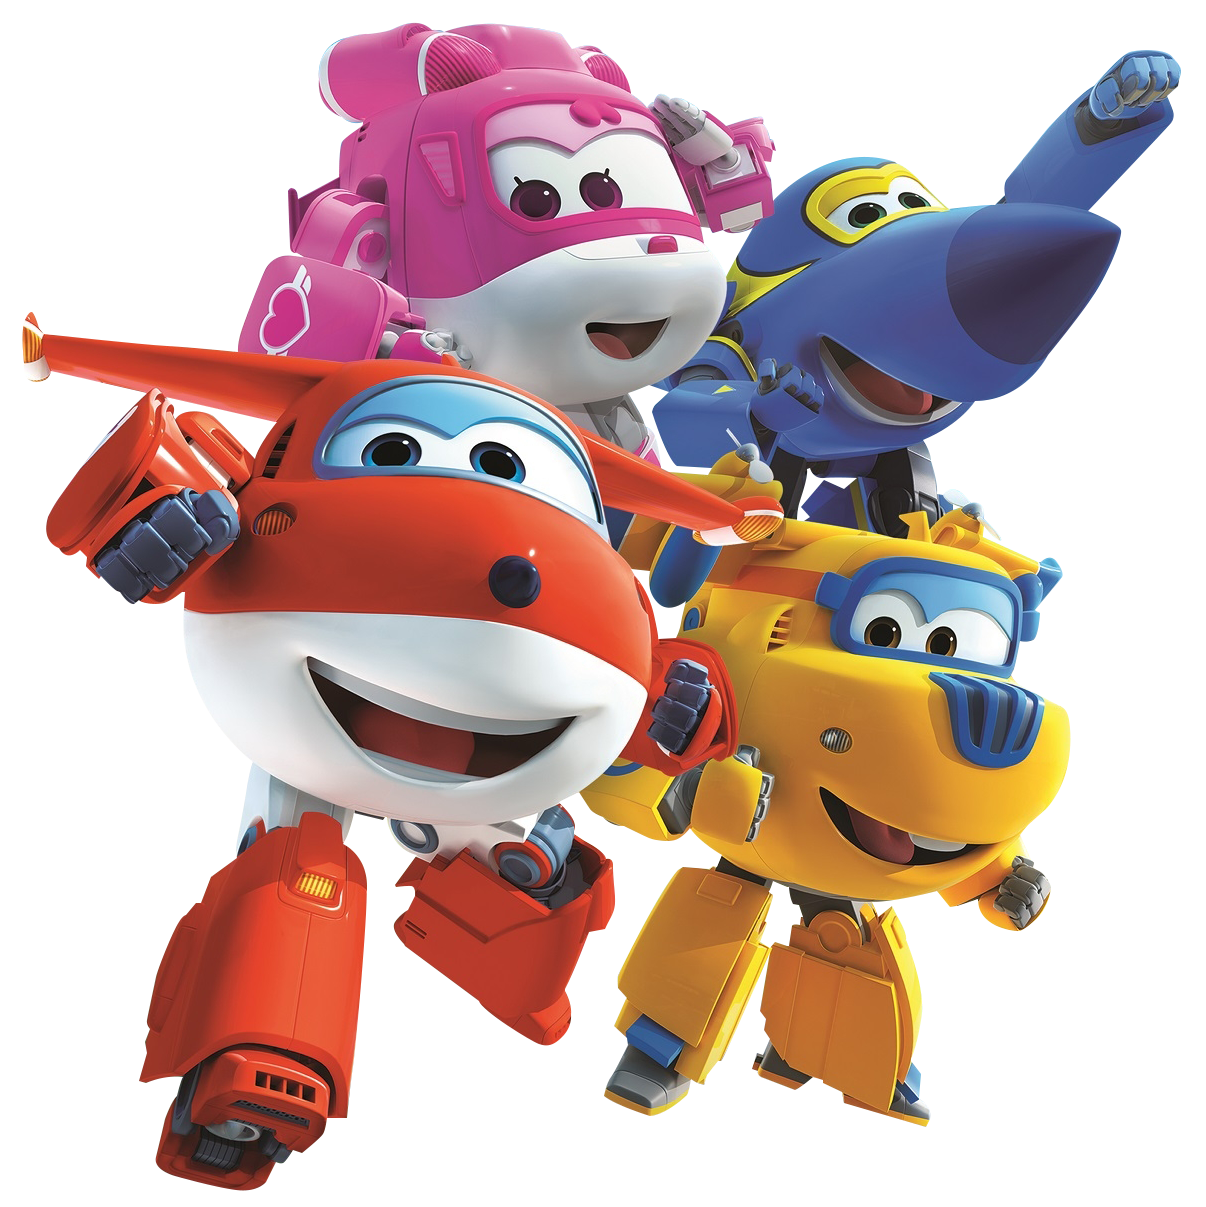 Image - Super-wings-01.png | Super Wings Wiki | FANDOM powered by Wikia